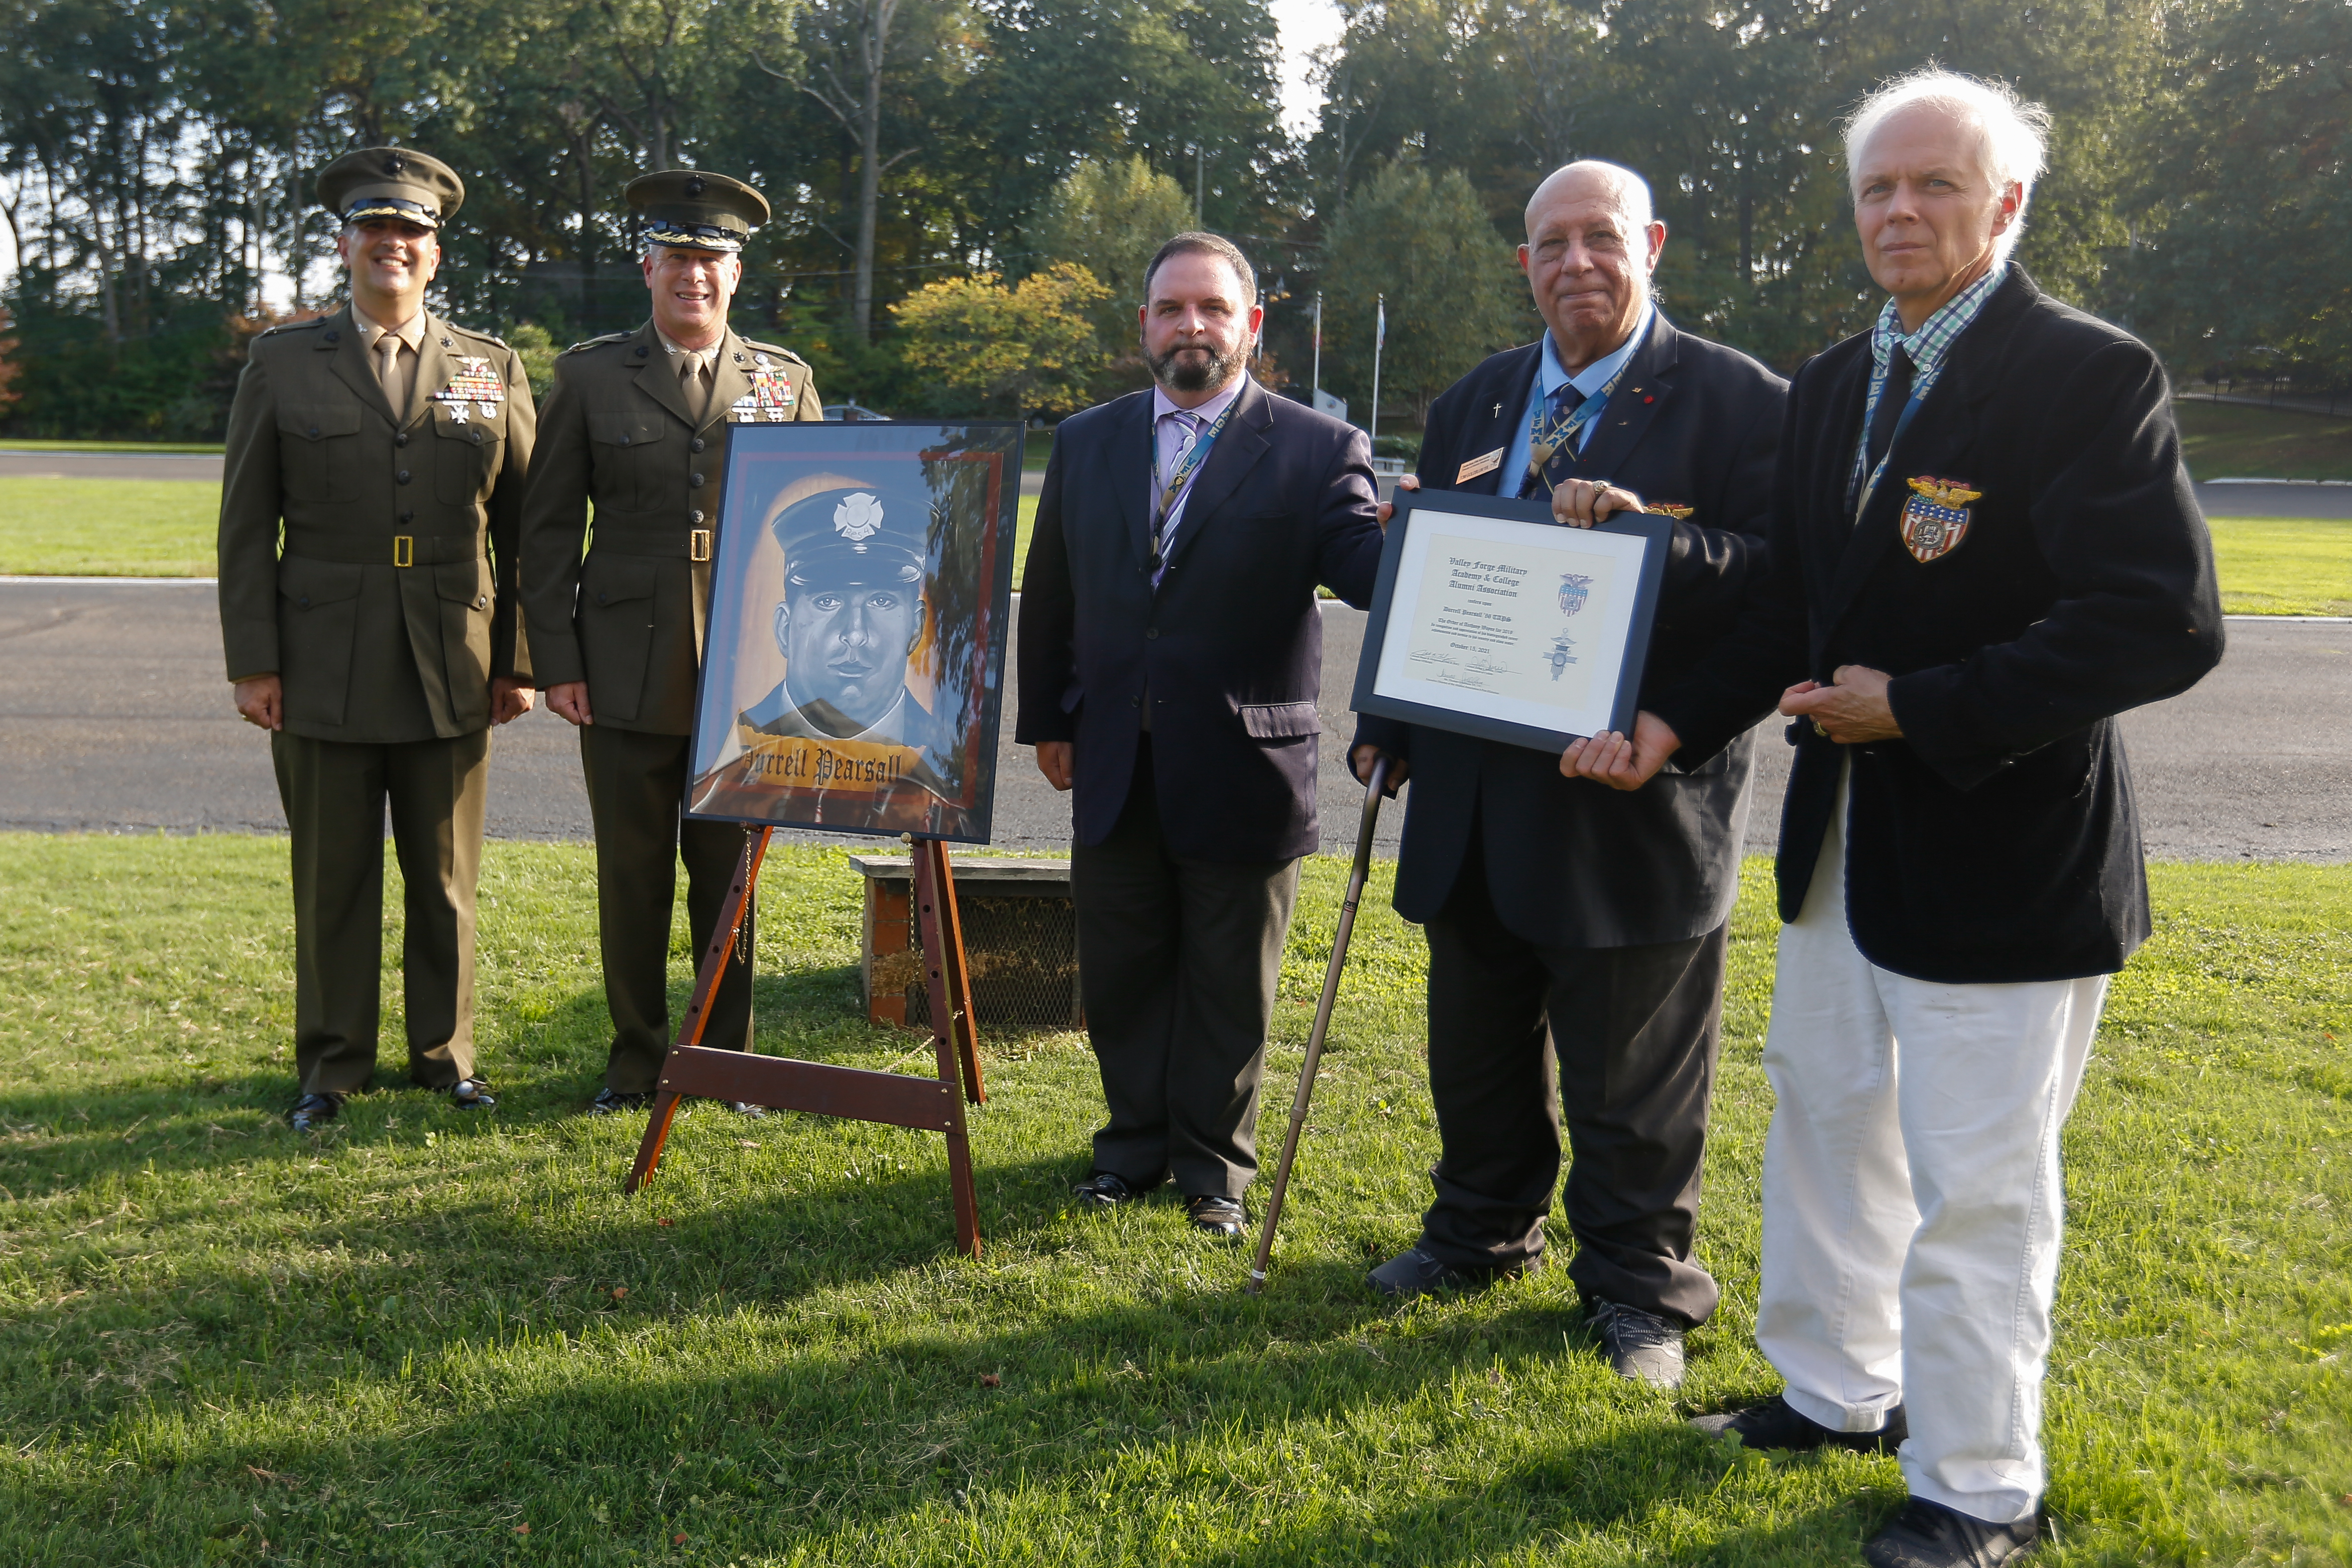 Valley Forge Military Academy and College, Monday, October 18, 2021, Press release picture